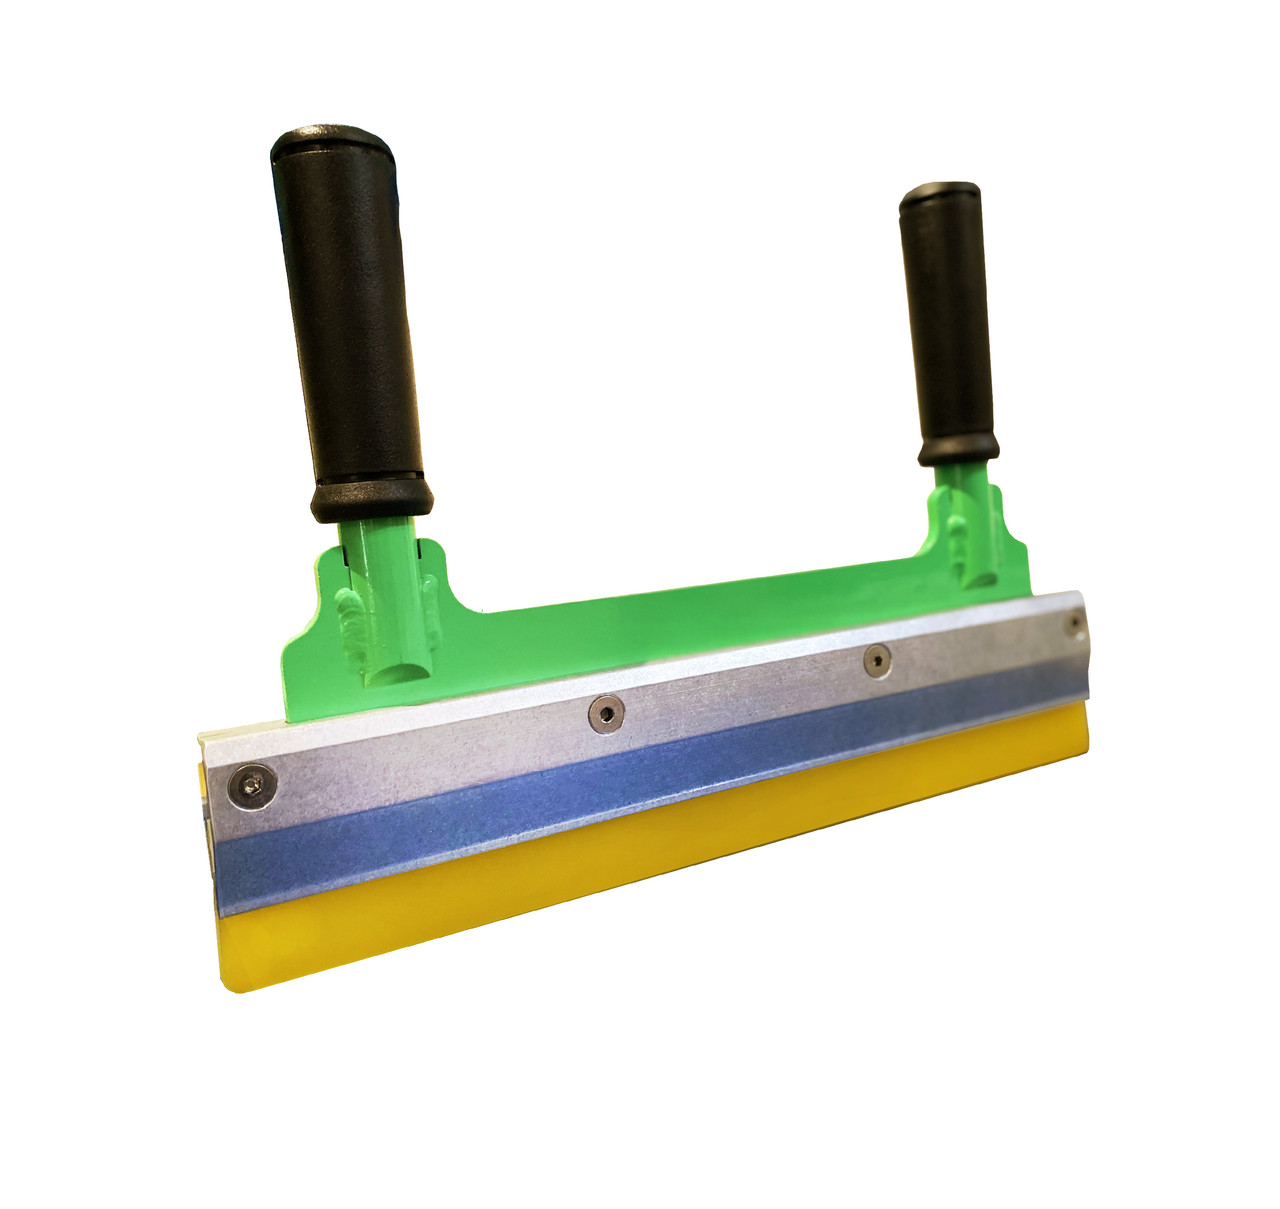 Top 5 Important Things to Know When Choosing a Squeegee